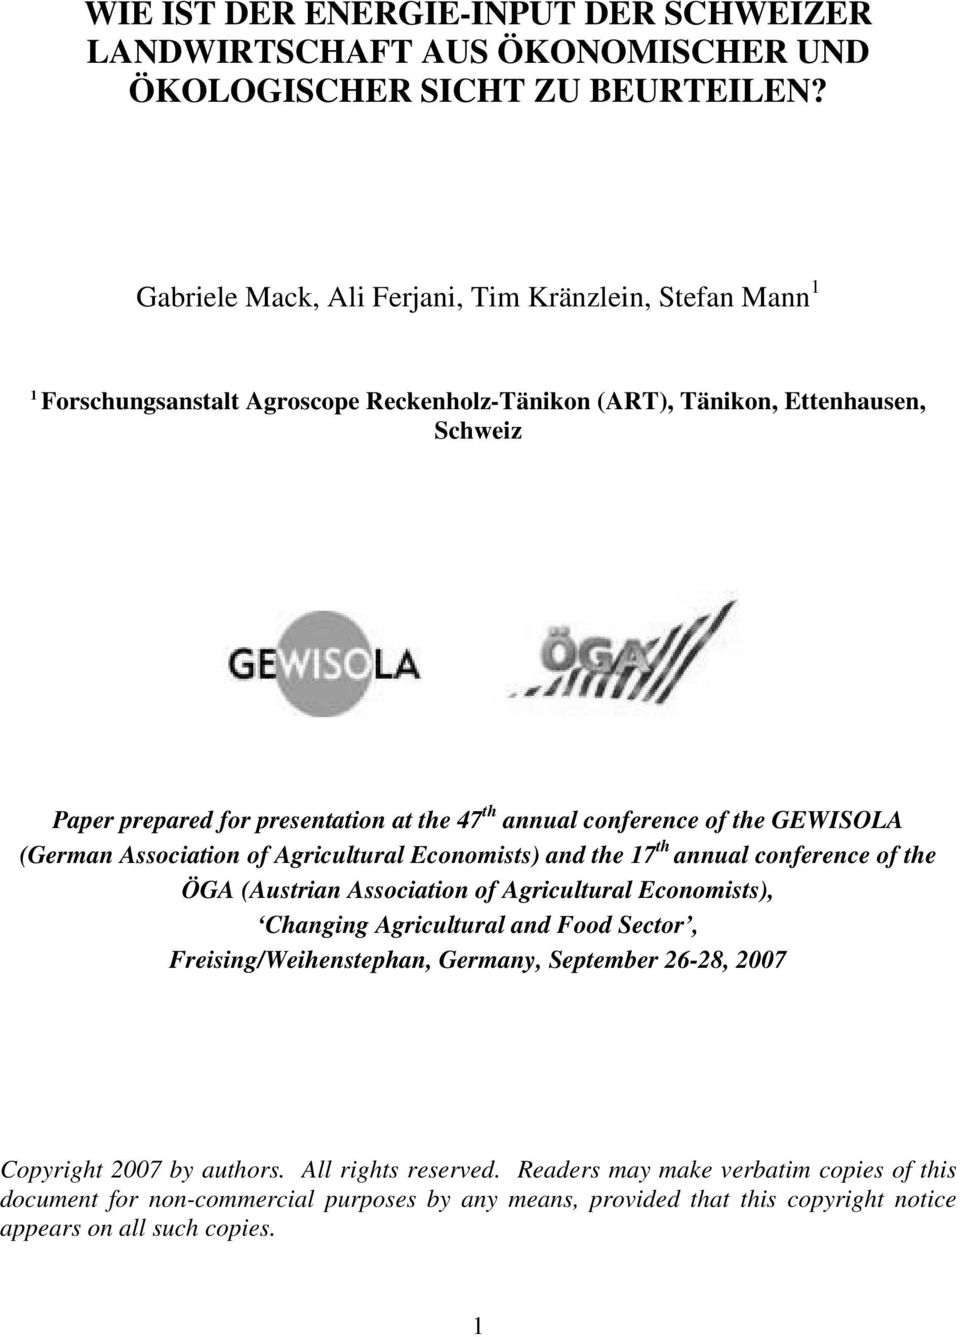 annual conference of the GEWISOLA (German Association of Agricultural Economists) and the 17 th annual conference of the ÖGA (Austrian Association of Agricultural Economists), Changing